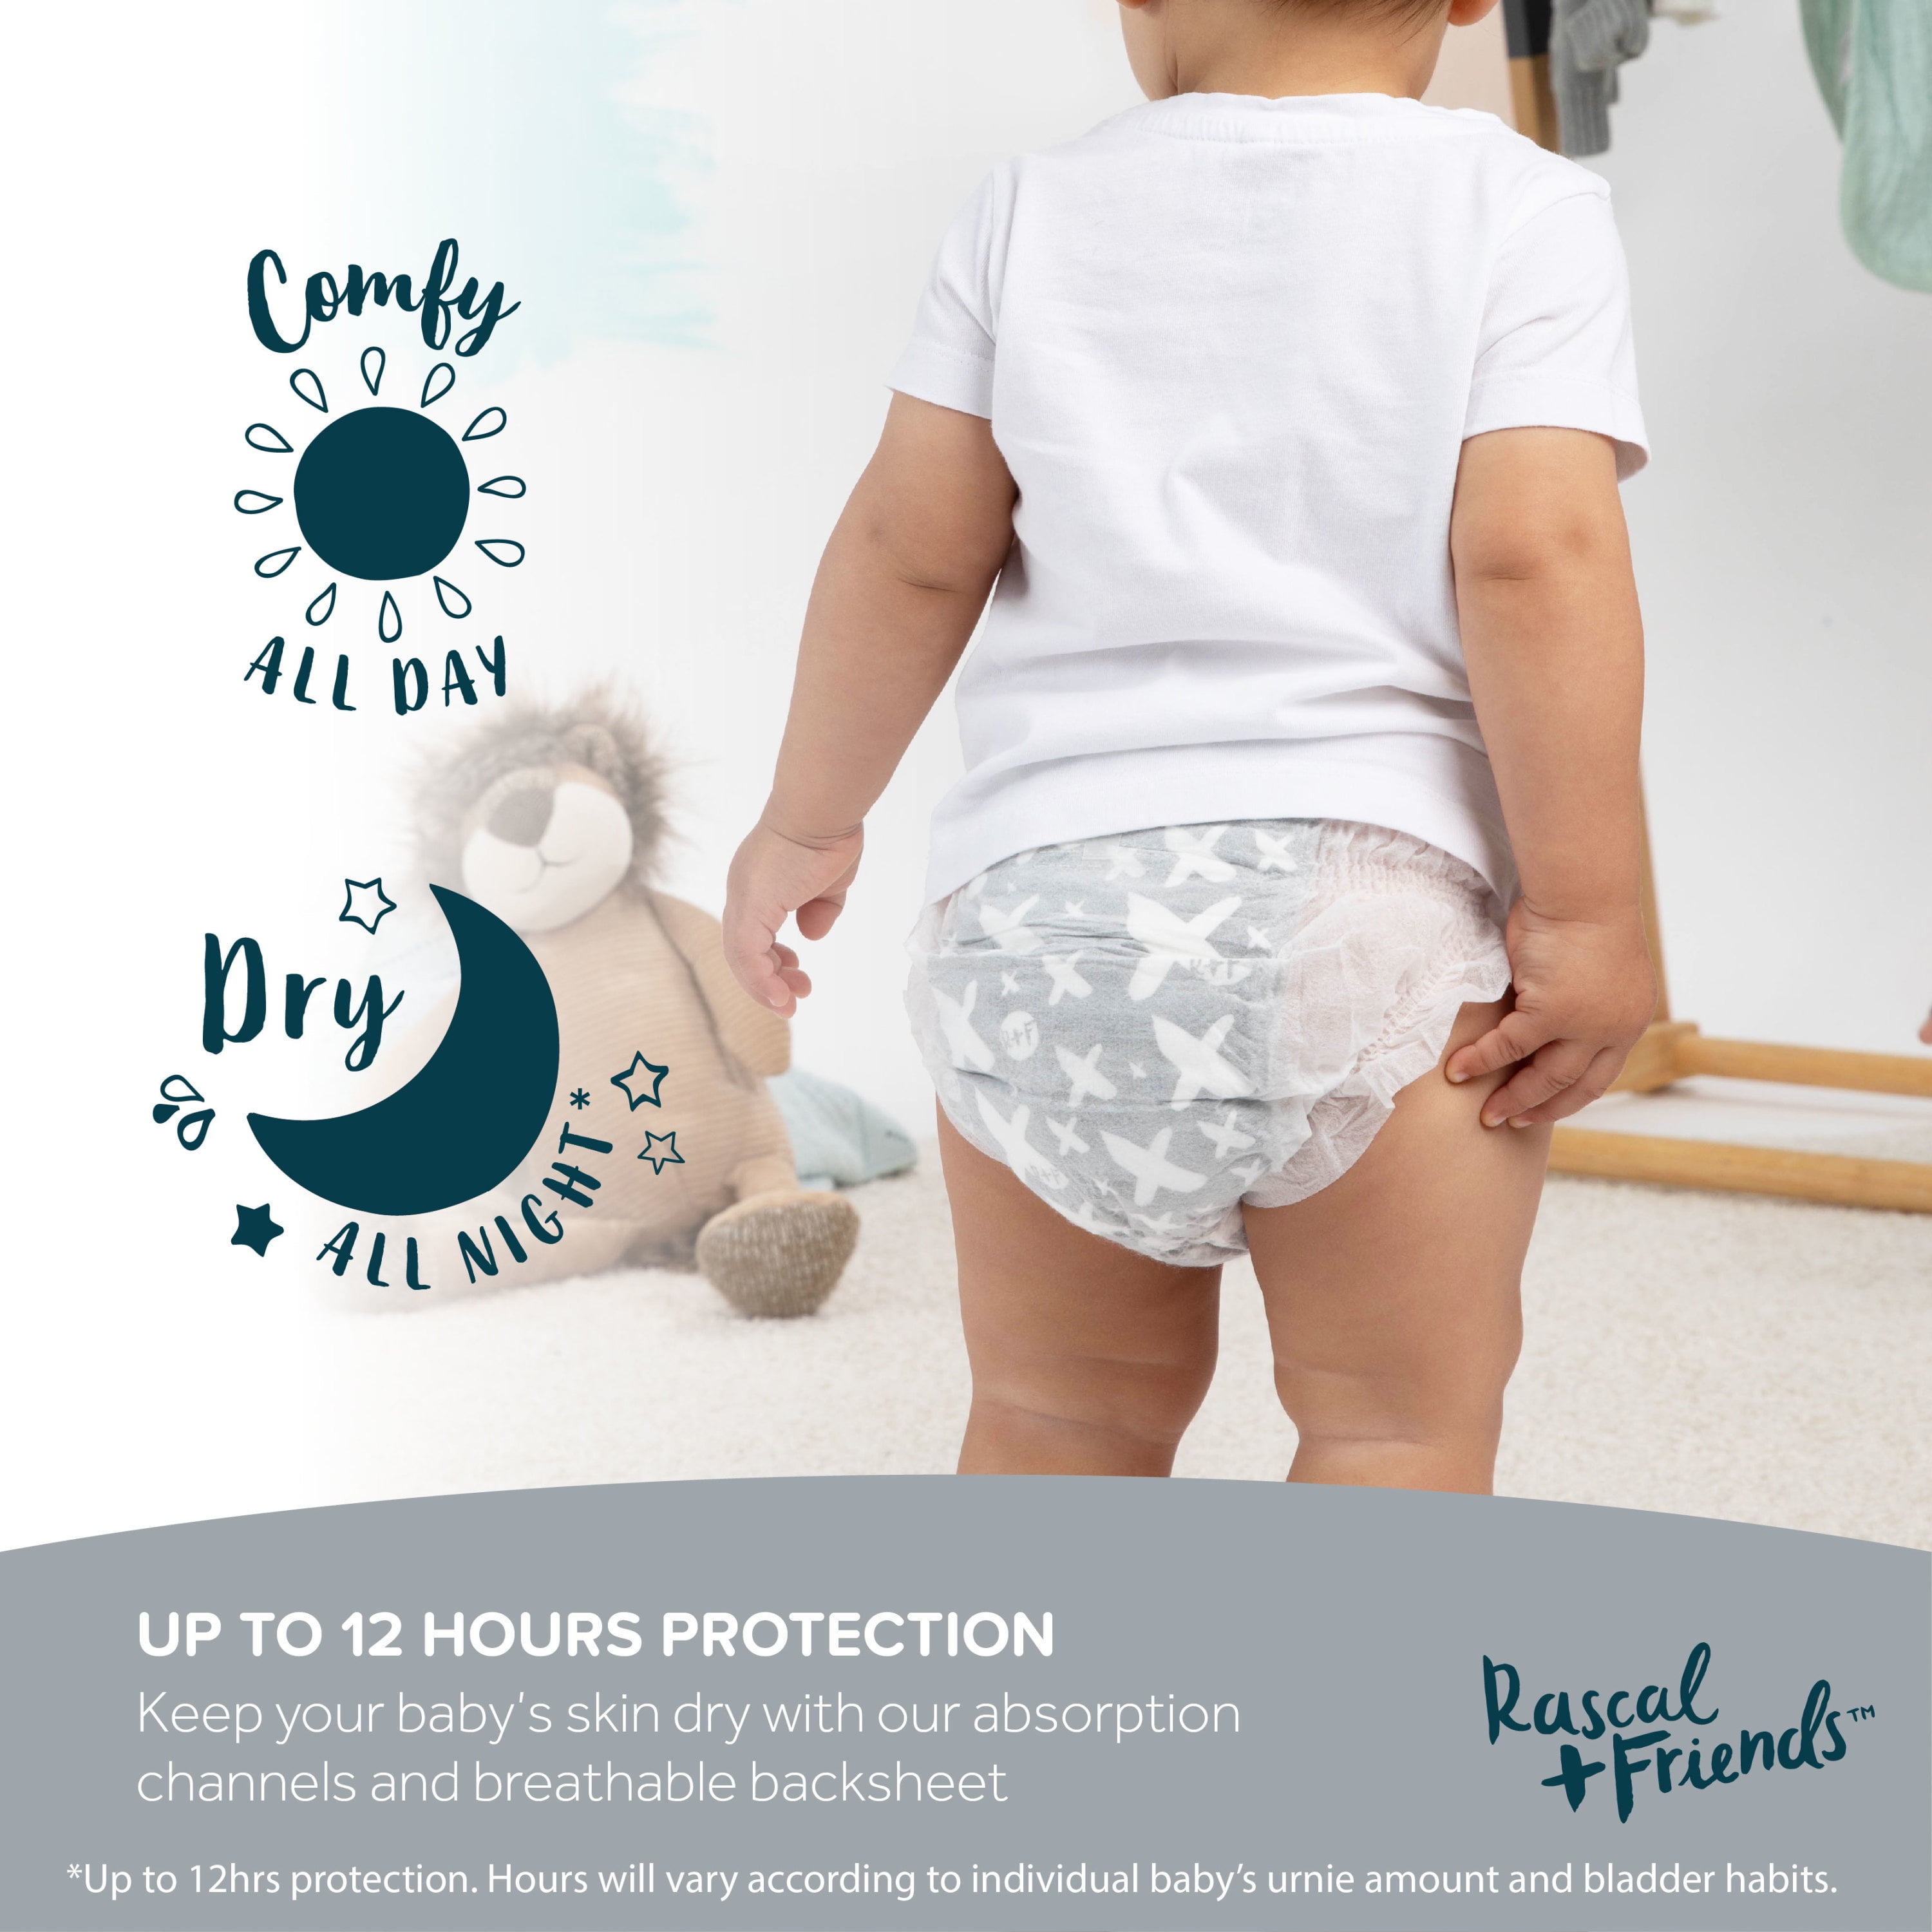 Rascal + Friends, SAVE these tips to have the perfect Rascal + Friends  Diaper fit, every time! 🙌